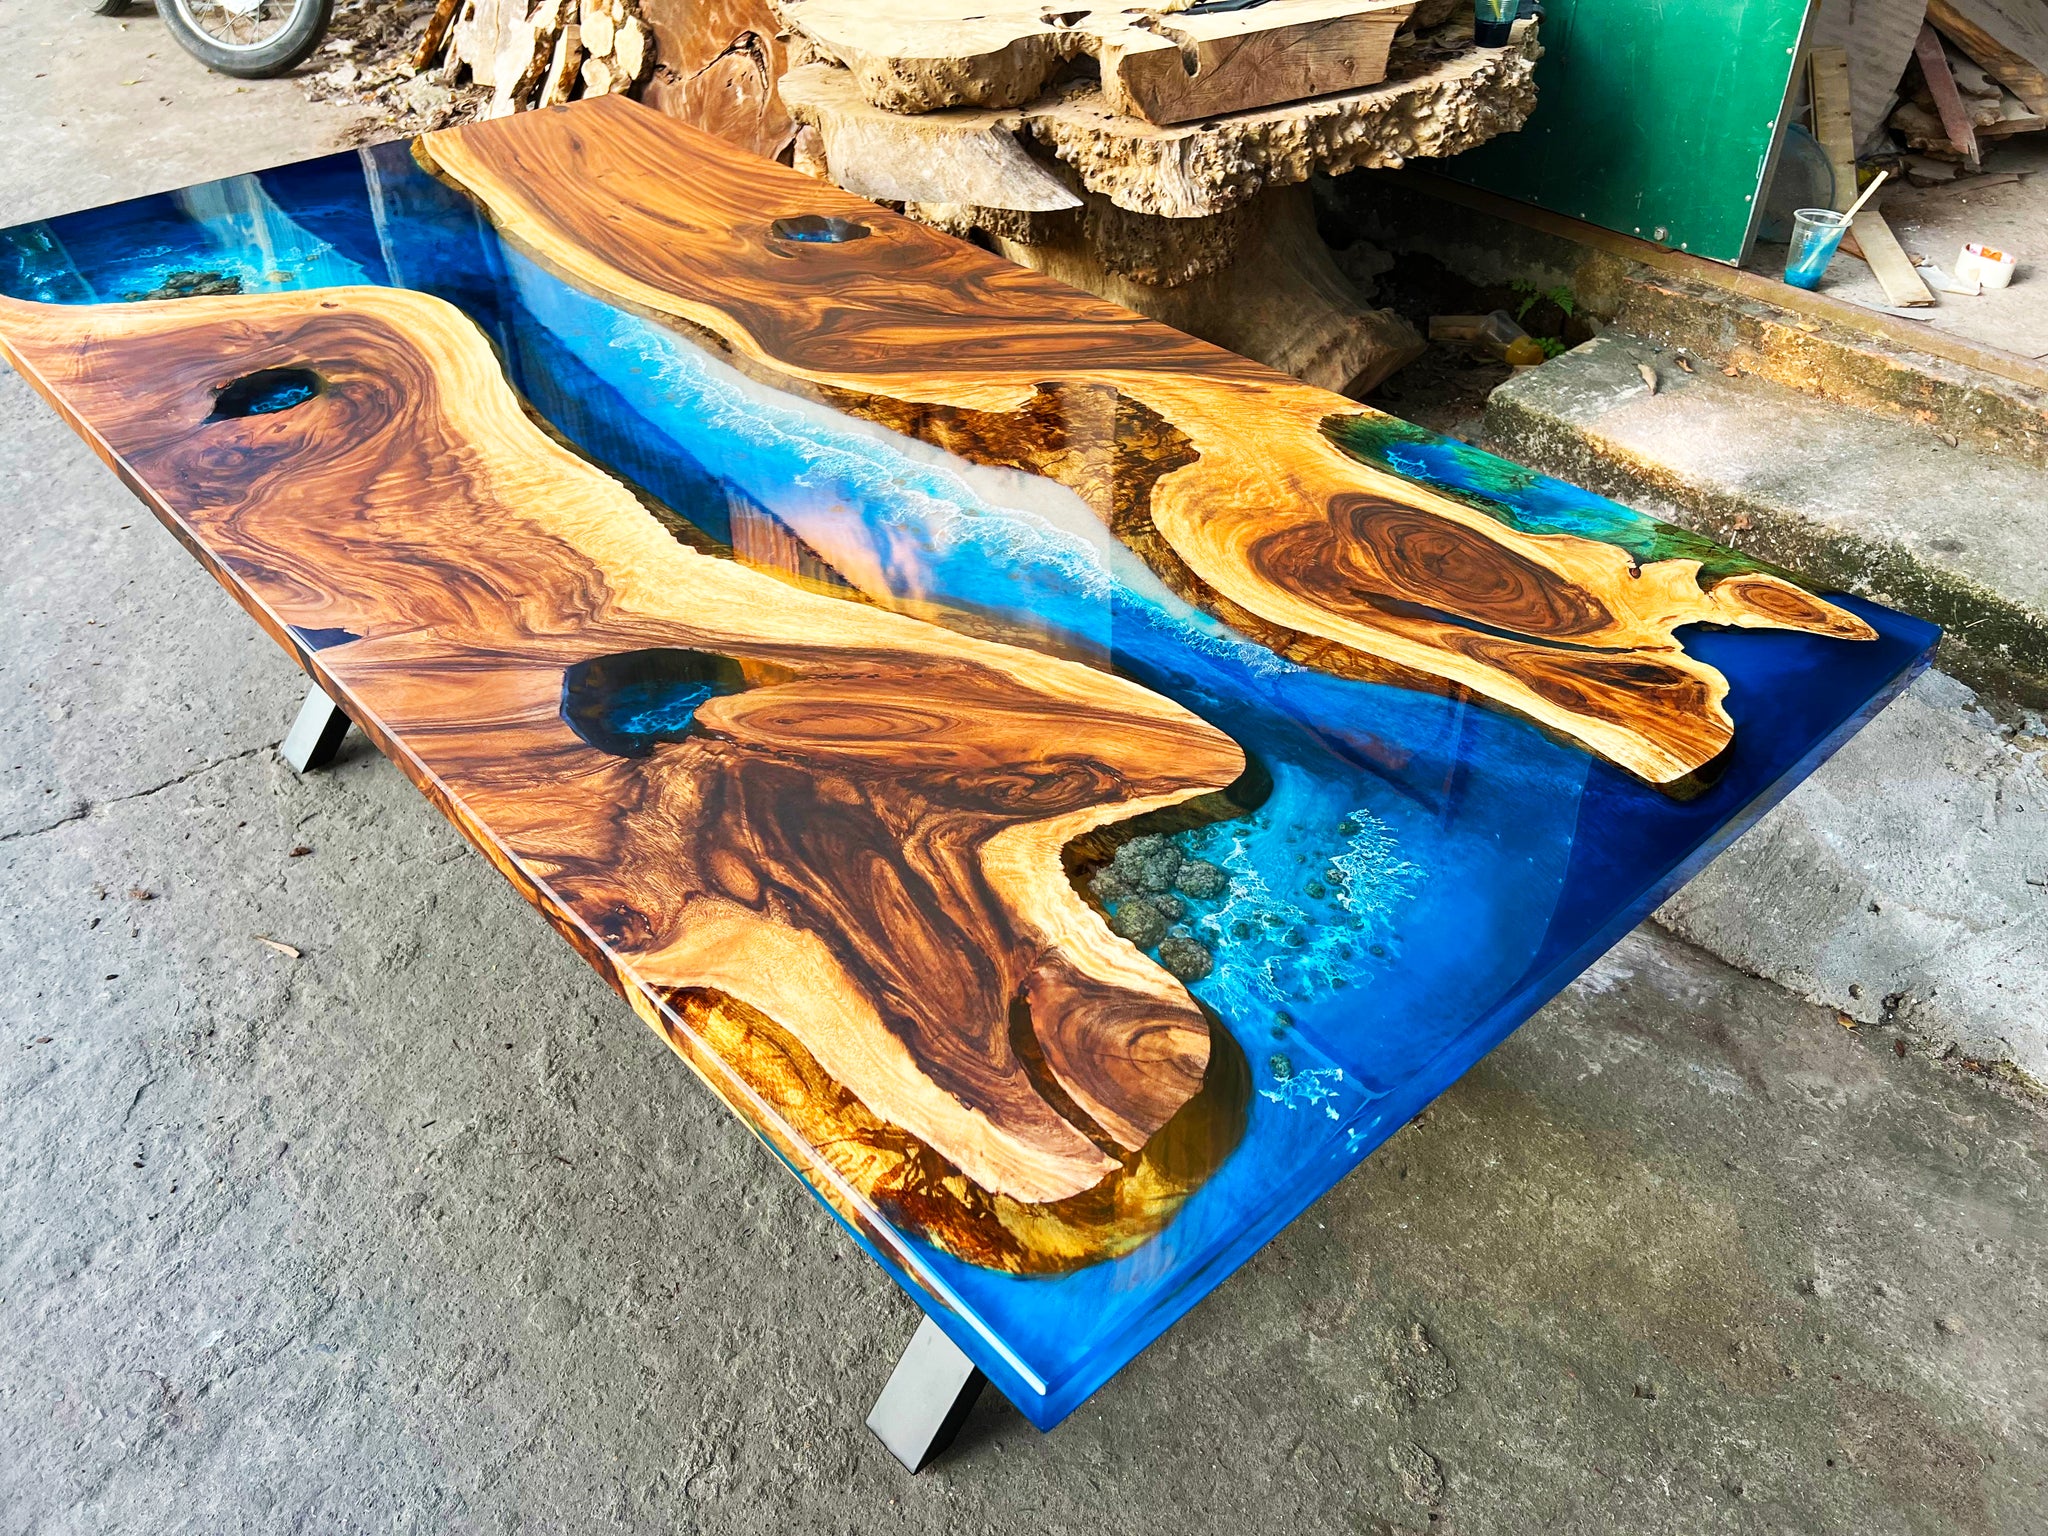 Ocean Waves Console Table, Resin on Live Edge Wood